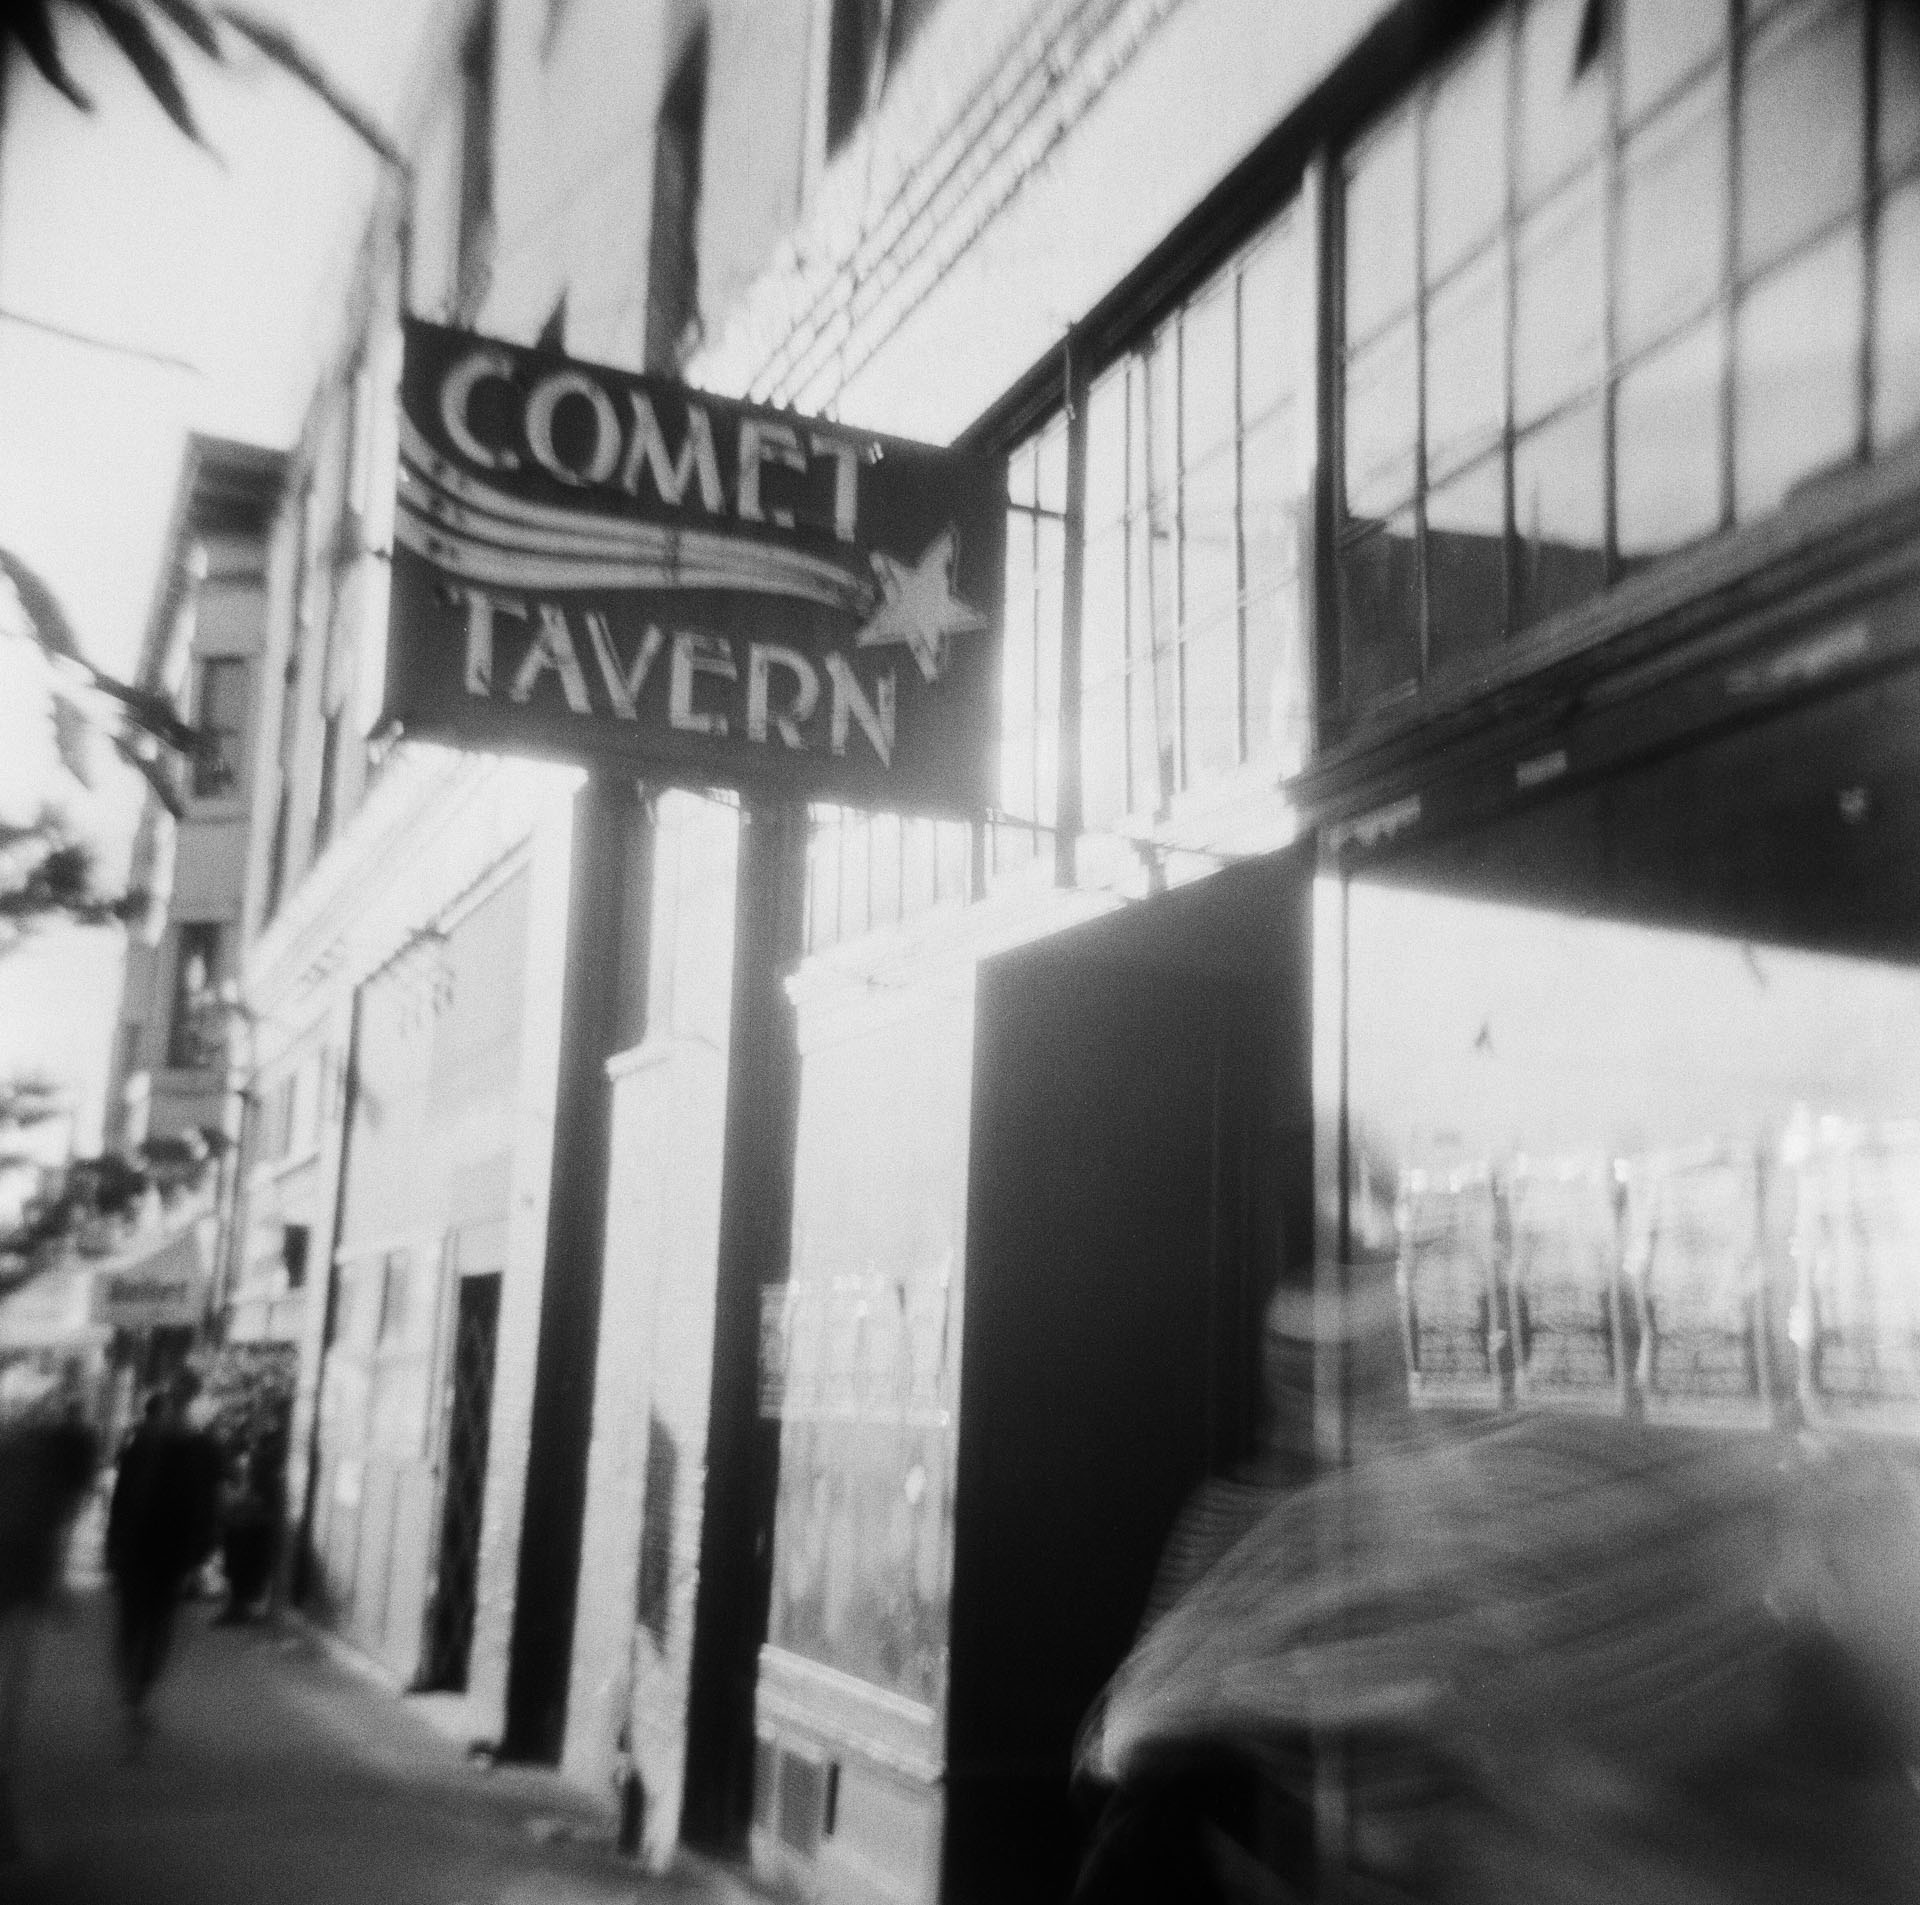 Comet Tavern with Ghost